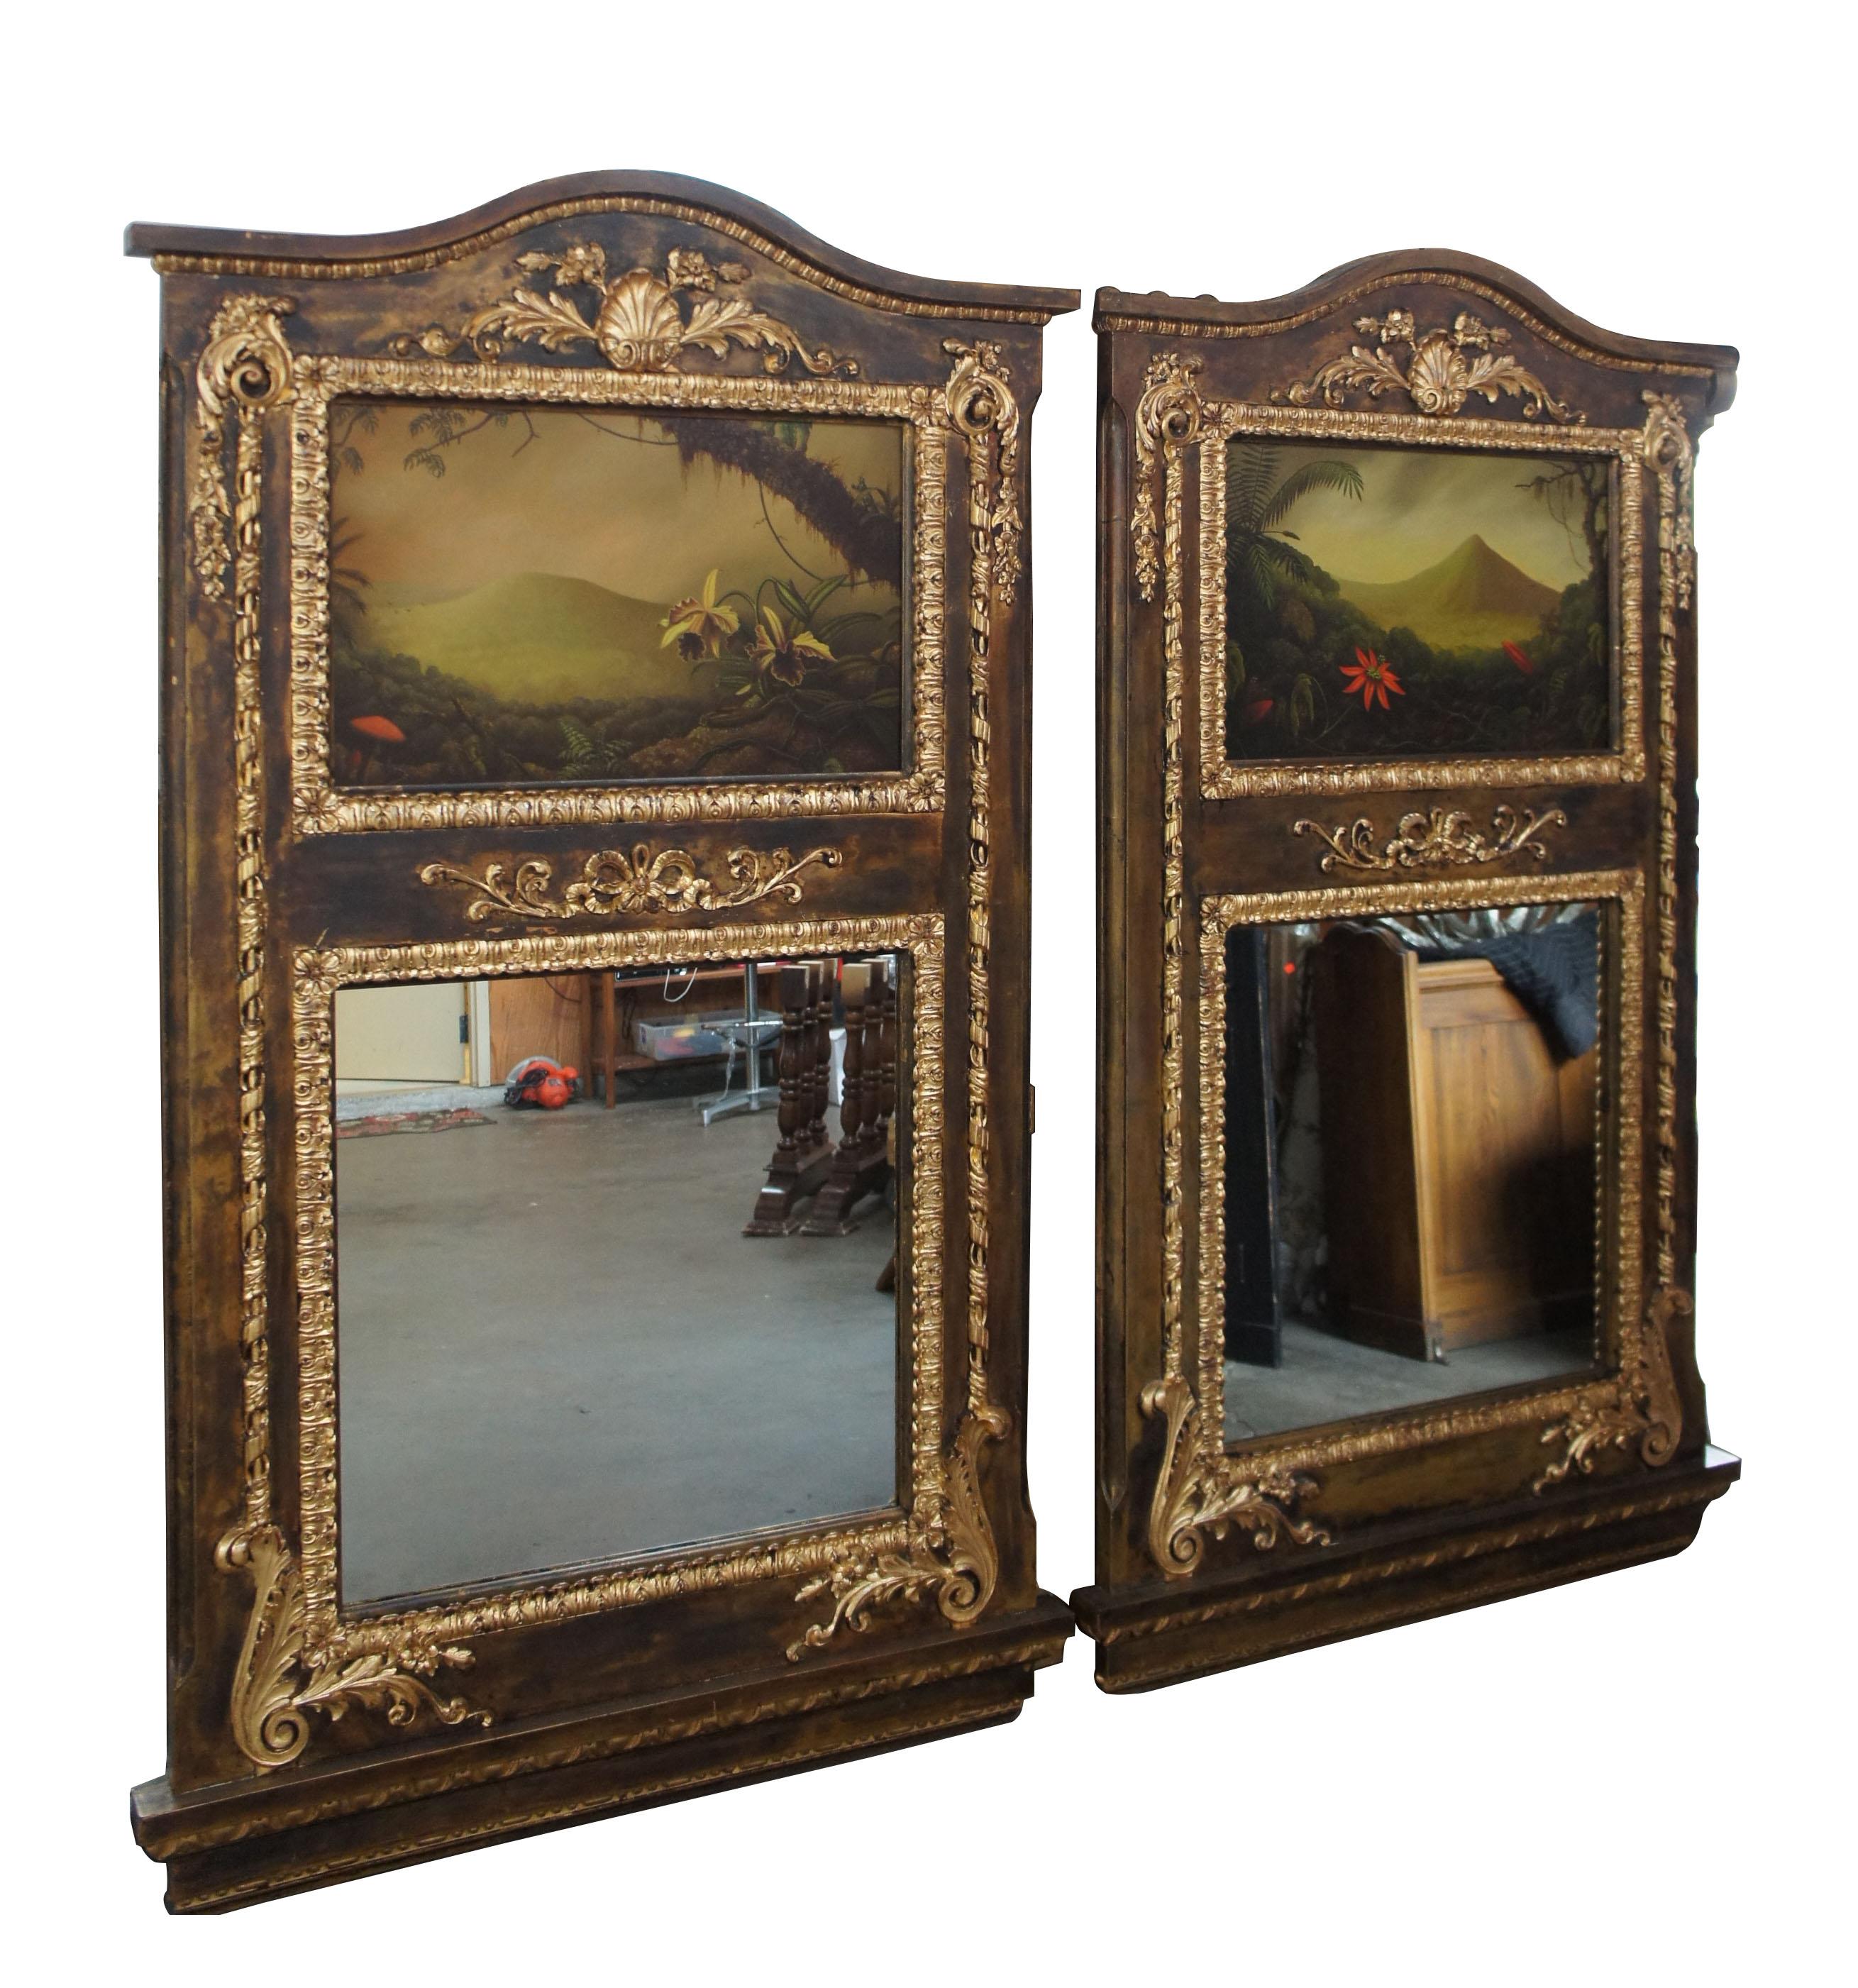 Monumental neoclassical wall mirrors with original Peter Edlund oil paintings

A one of a kind pair of handmade French neoclassical inspired wall mirrors. Meticulously detailed with a hand painted finish, low relief flourishes and Original Peter